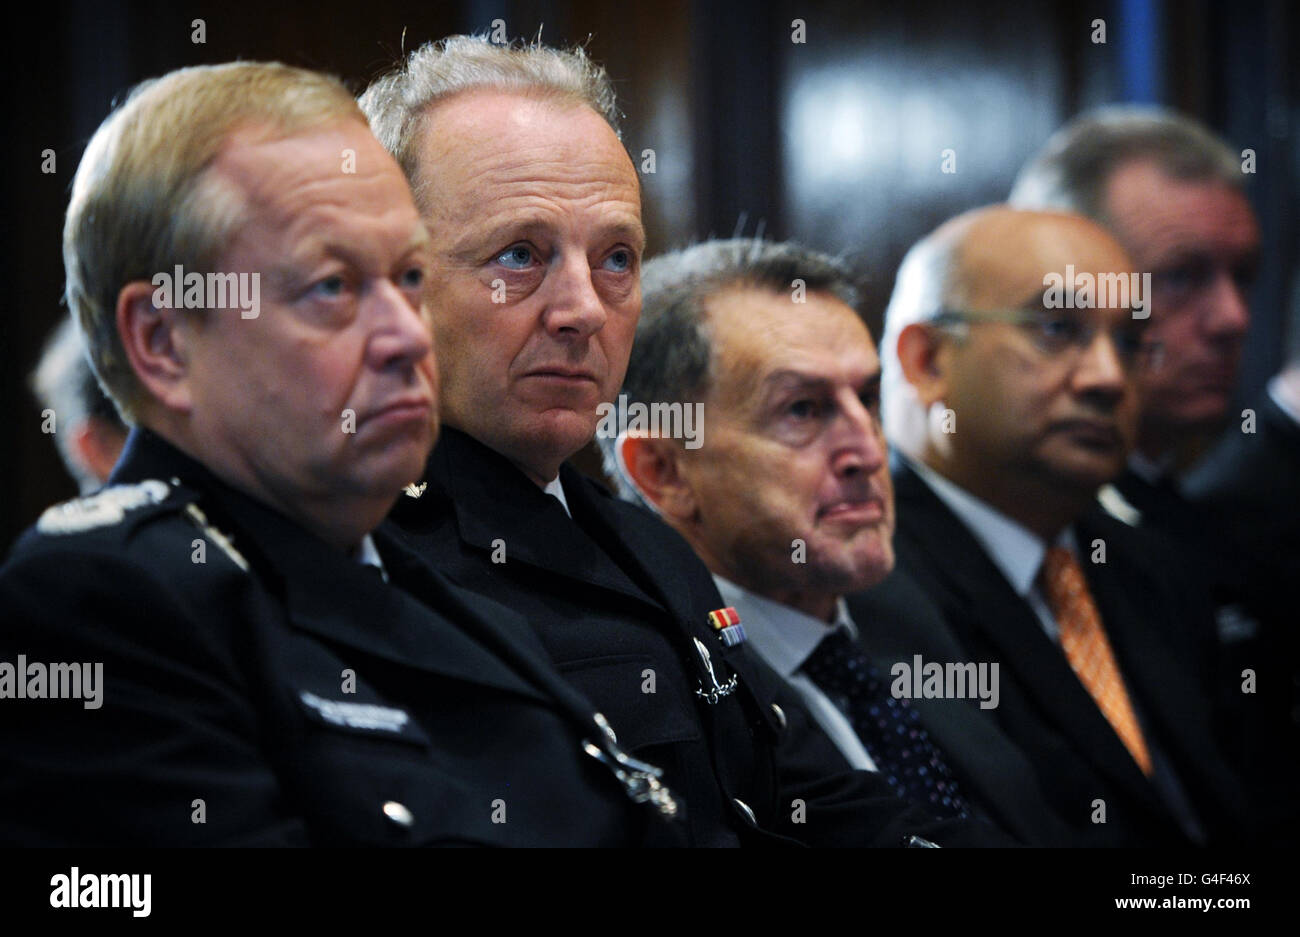 Acting Metropolitan Police Commissioner Tim Godwin (left) and Sir Hugh Orde (second left), President of the Association of Chief Police Officers listen to the Home Secretary Theresa May make a speech on Police reform in central London. Stock Photo